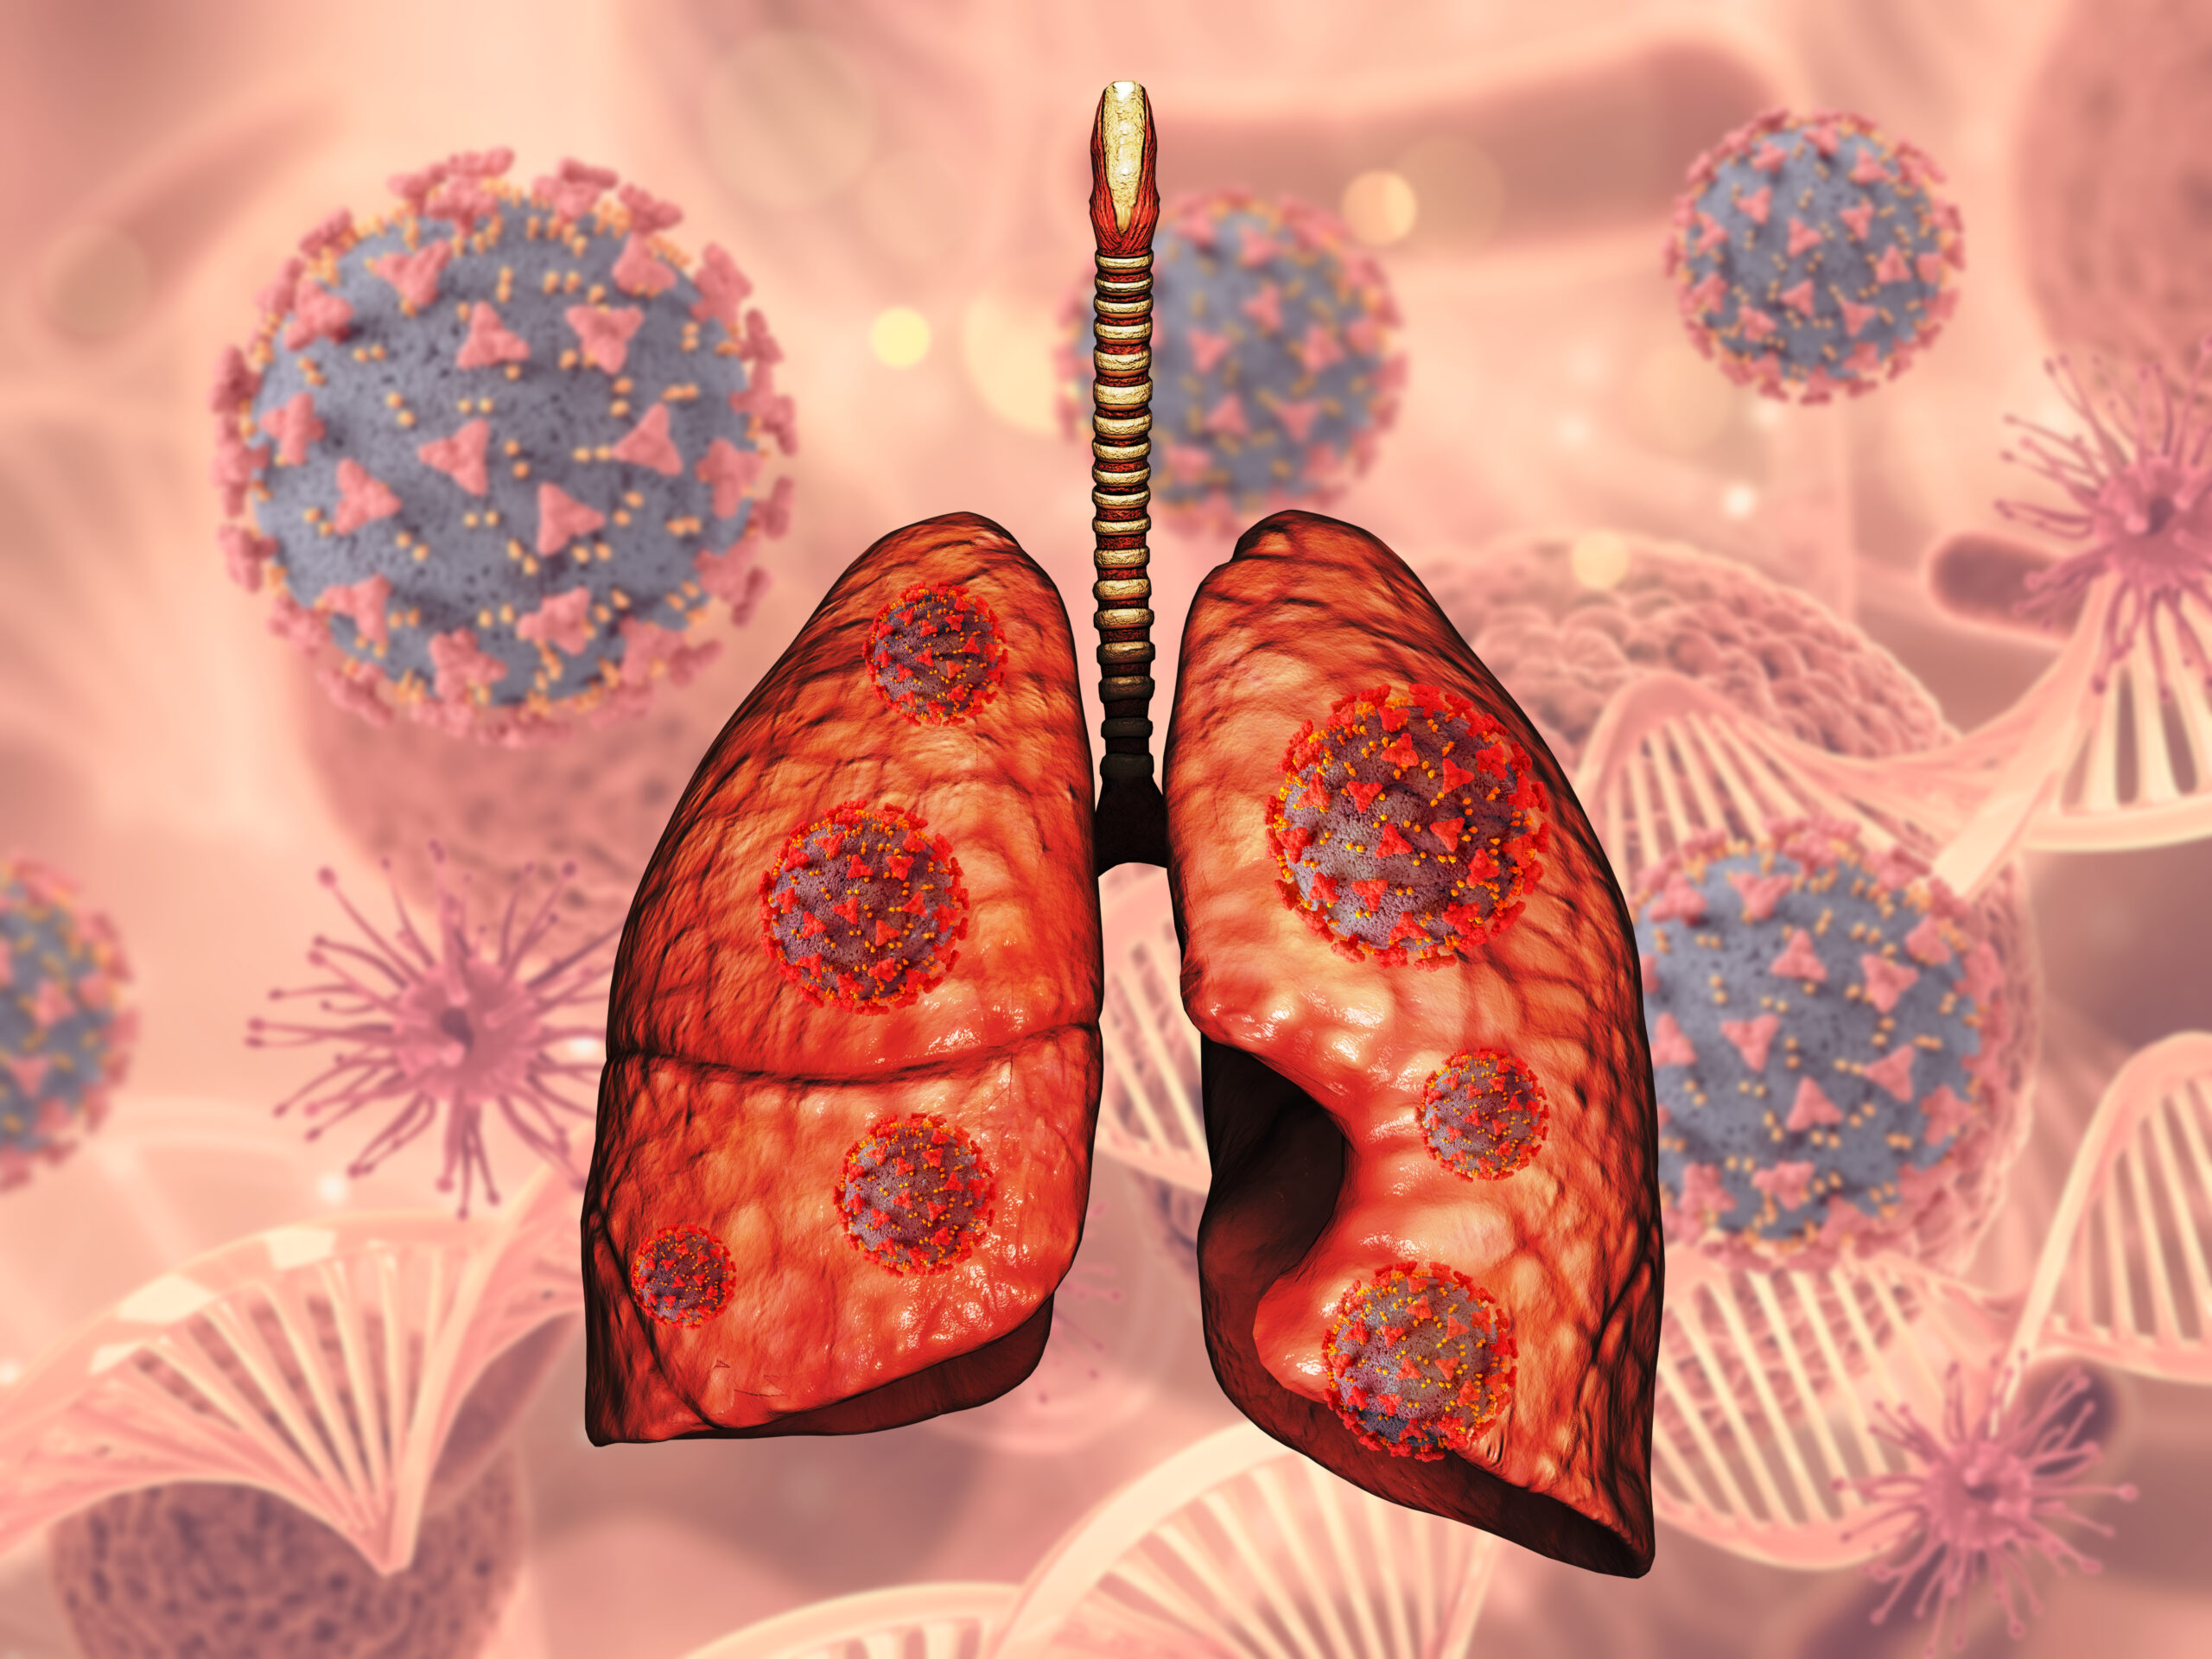 What are the symptoms of stage 4 lung cancer?